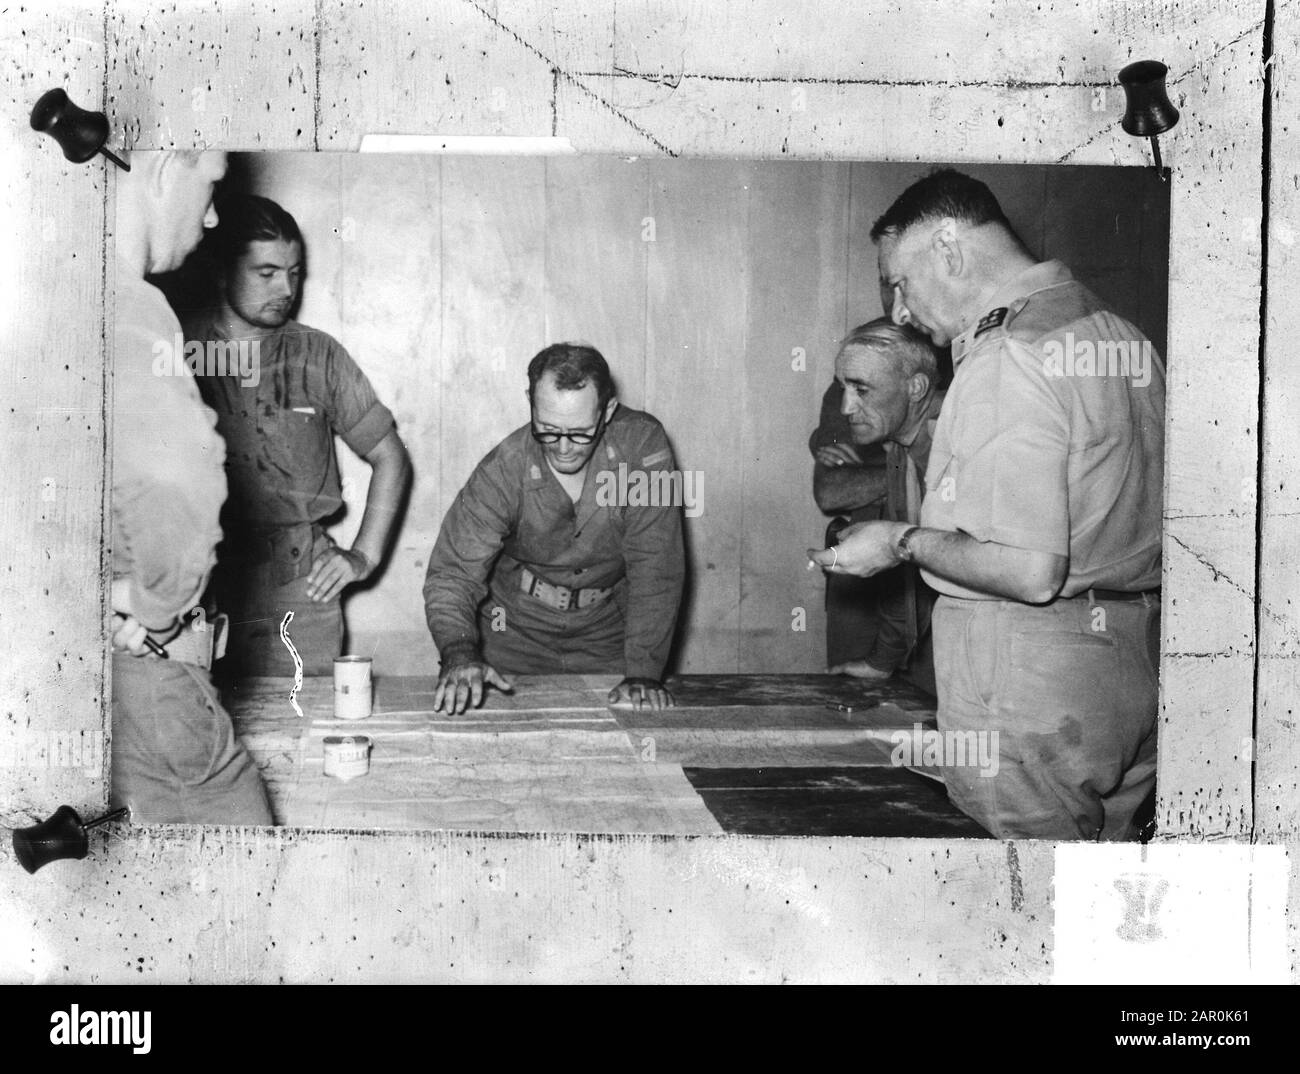 Marvo R13 Date: January 15, 1949 Keywords: cards, officers, uniforms Institution name: Marvo Stock Photo